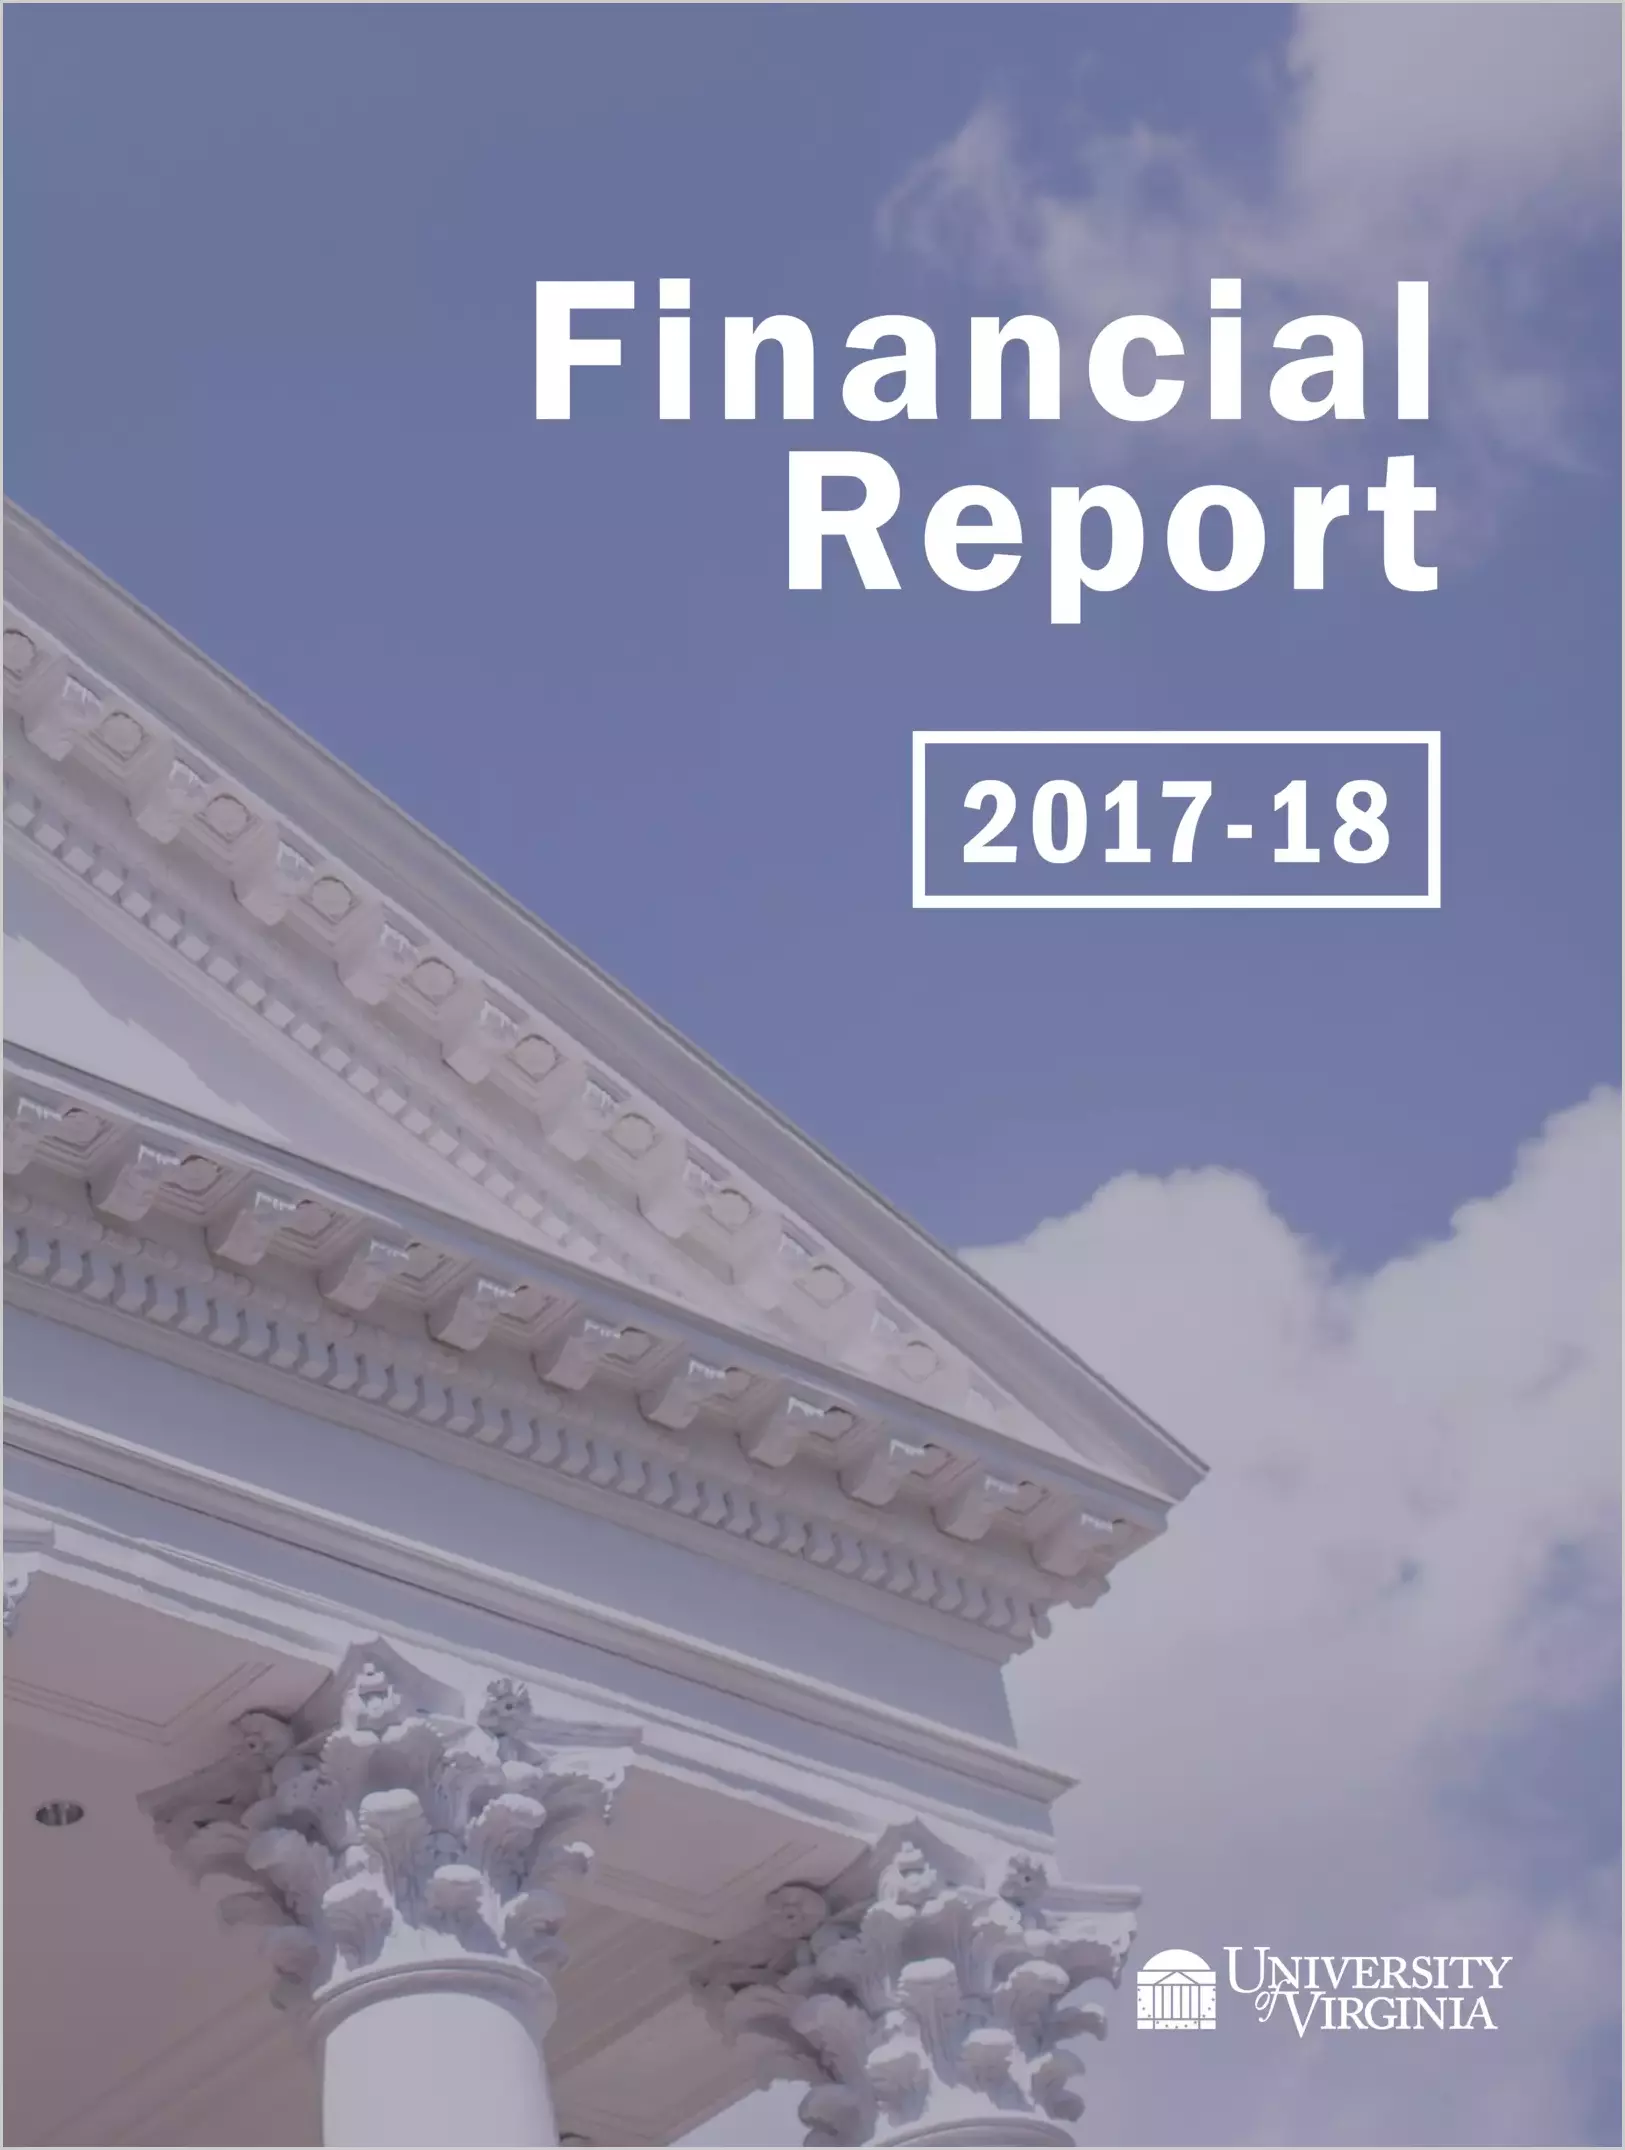 University of Virginia Financial Statements for the year ended June 30, 2018